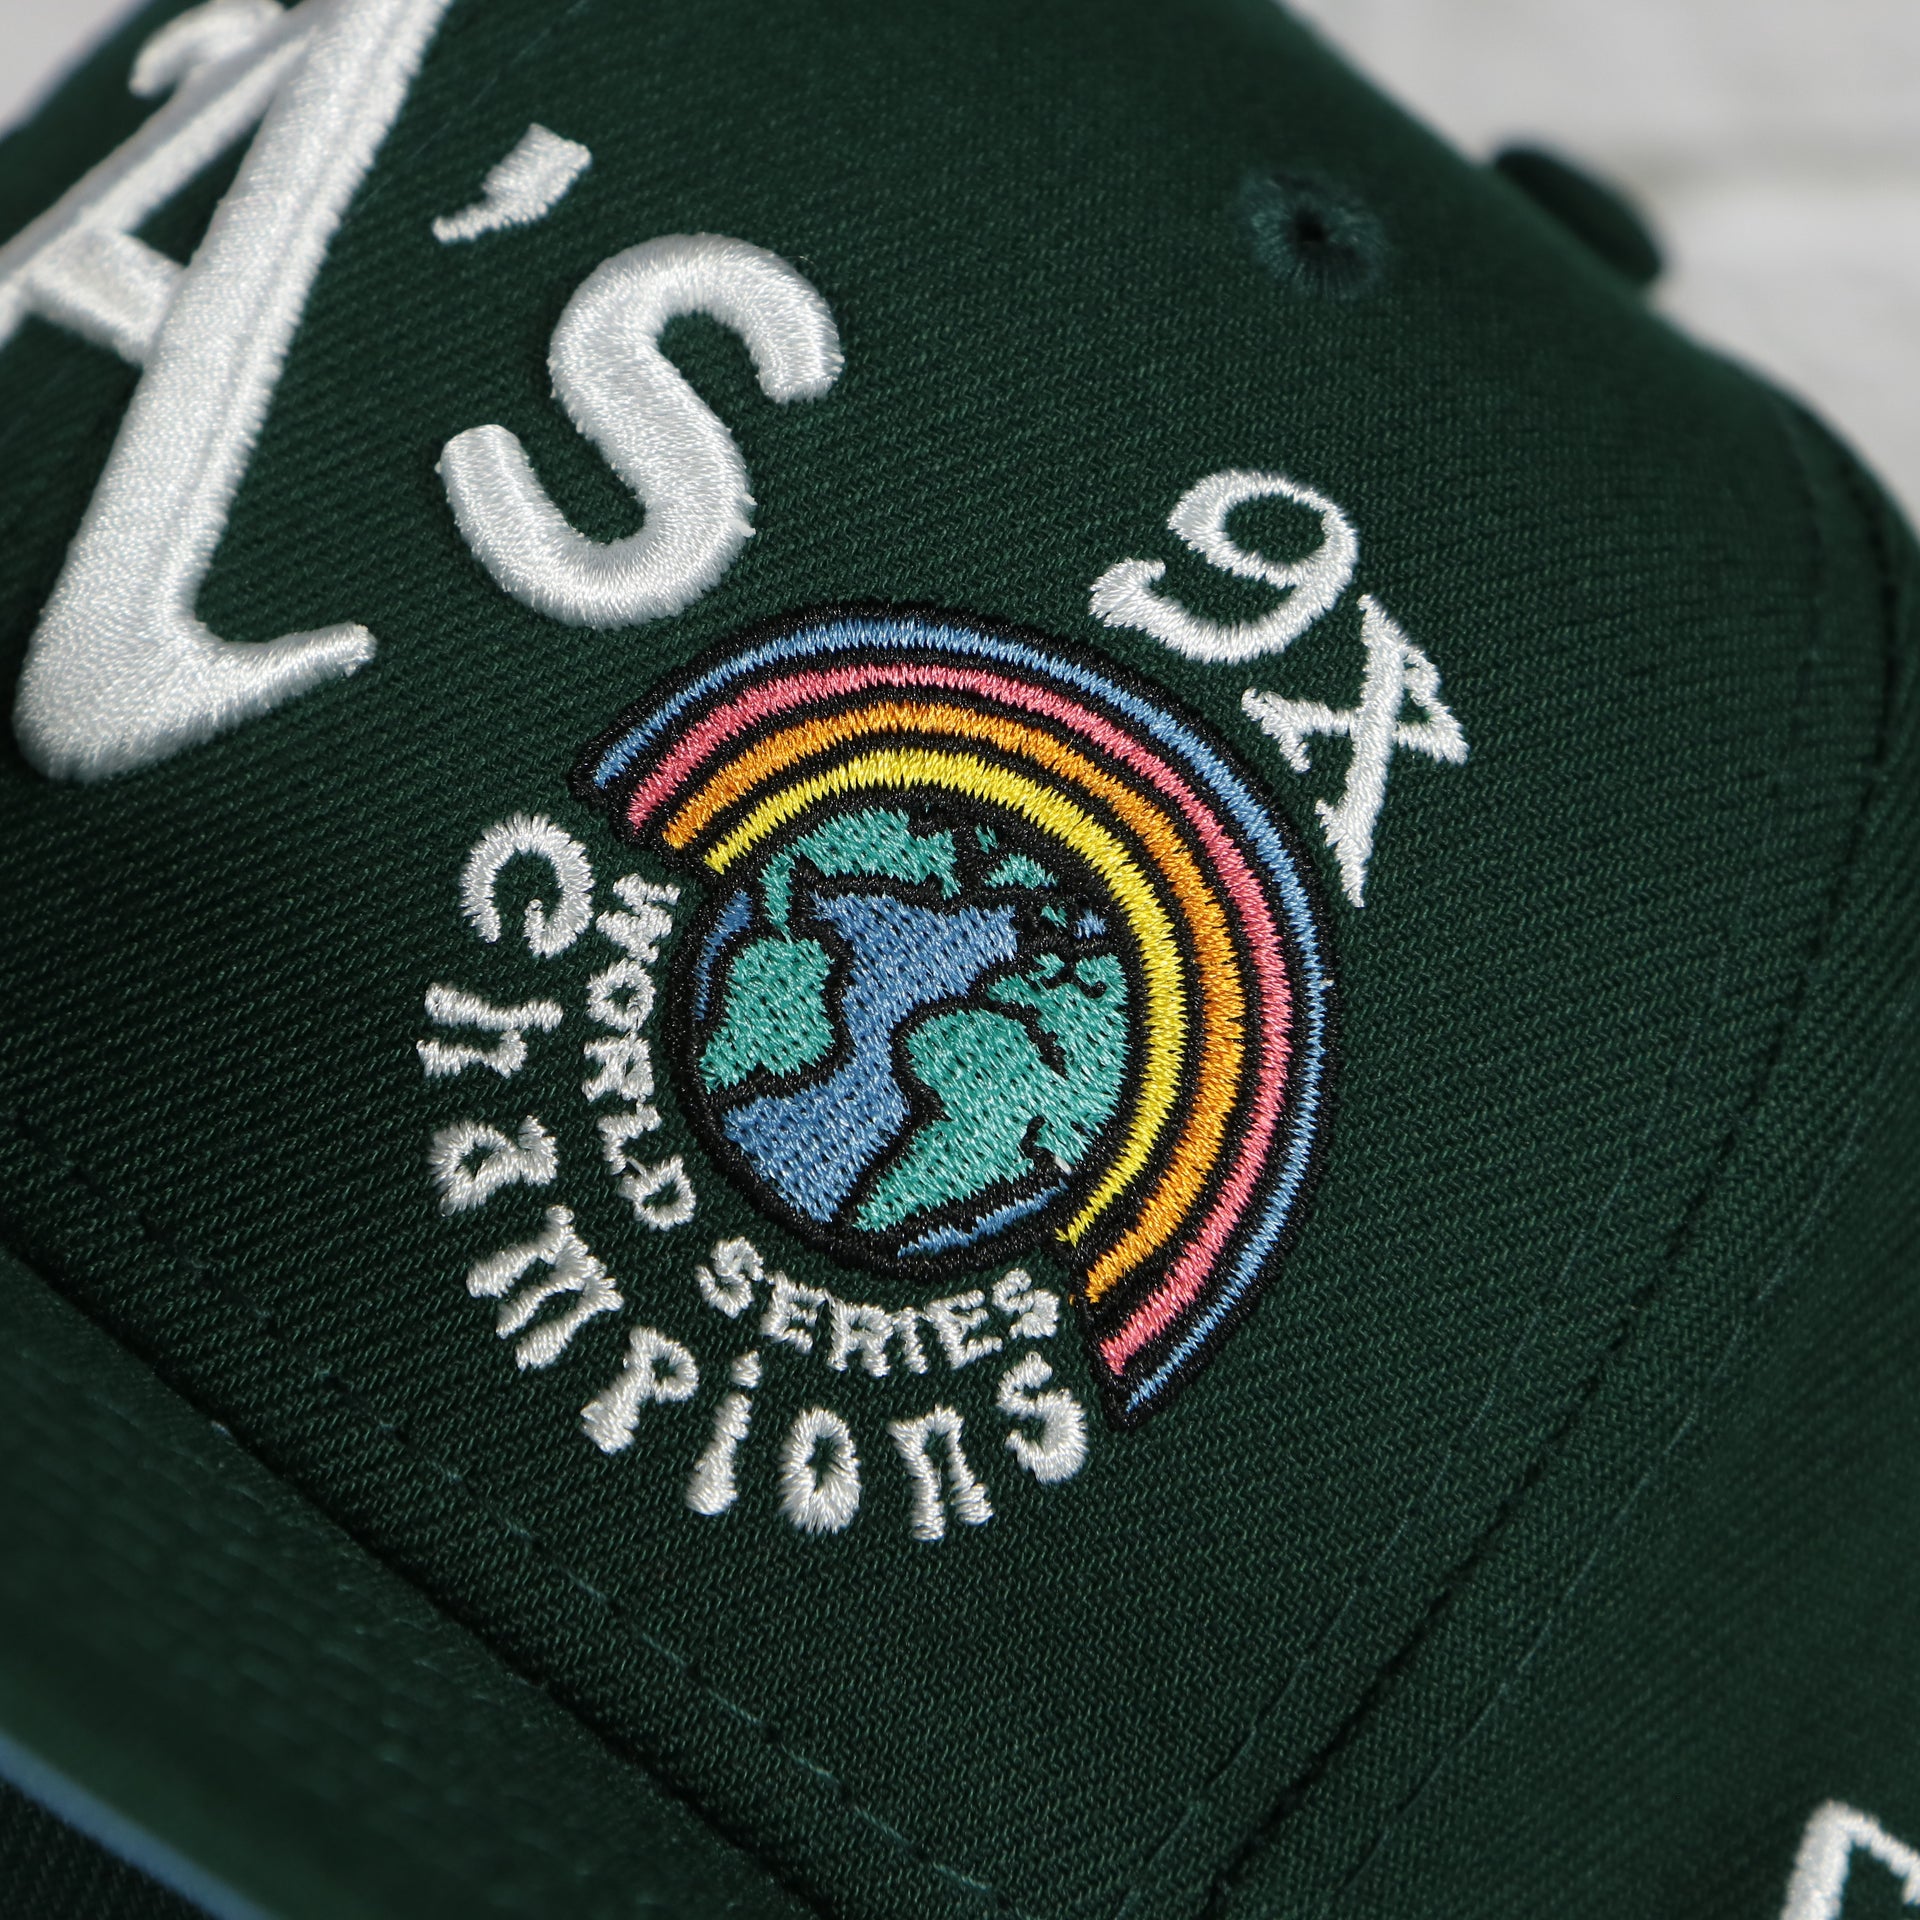 9x world series champions patch on the Oakland Athletics Groovy World Series Champions Patch 59Fifty Fitted Cap | New Era Groovy Side Patch 5950